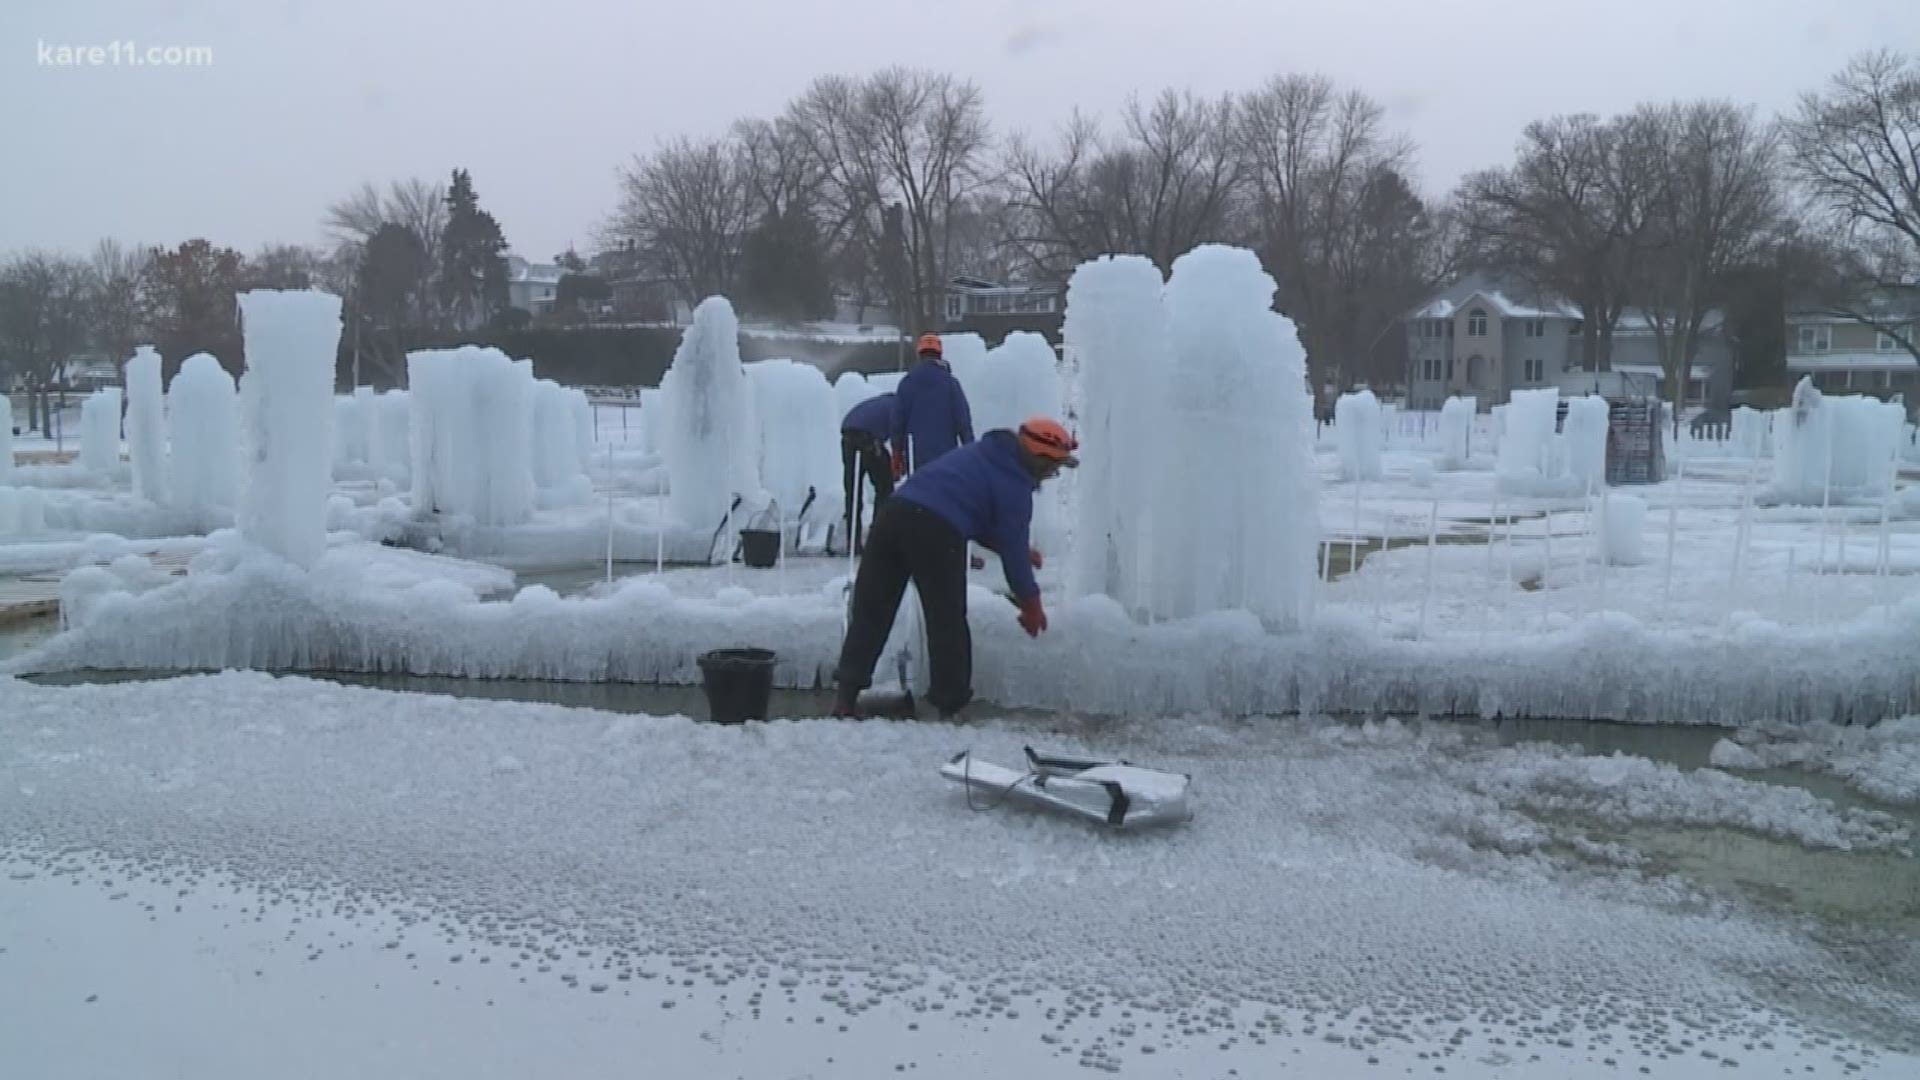 The team in Excelsior is expected to spend about 4,000 hours this season to drip, shape and place icicles for the castles. https://kare11.tv/2zJBADE